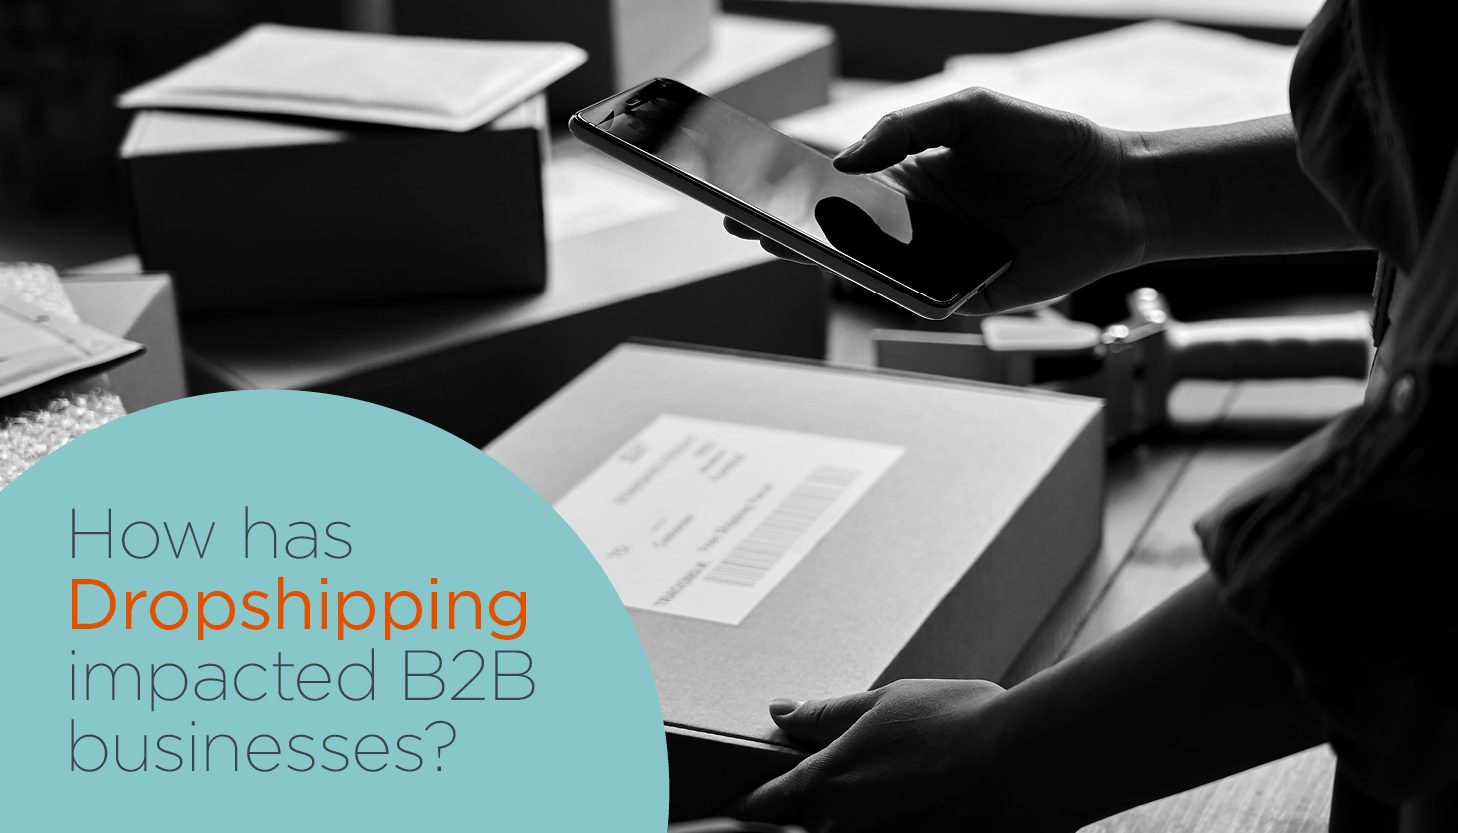 How has Dropshipping impacted B2B businesses?